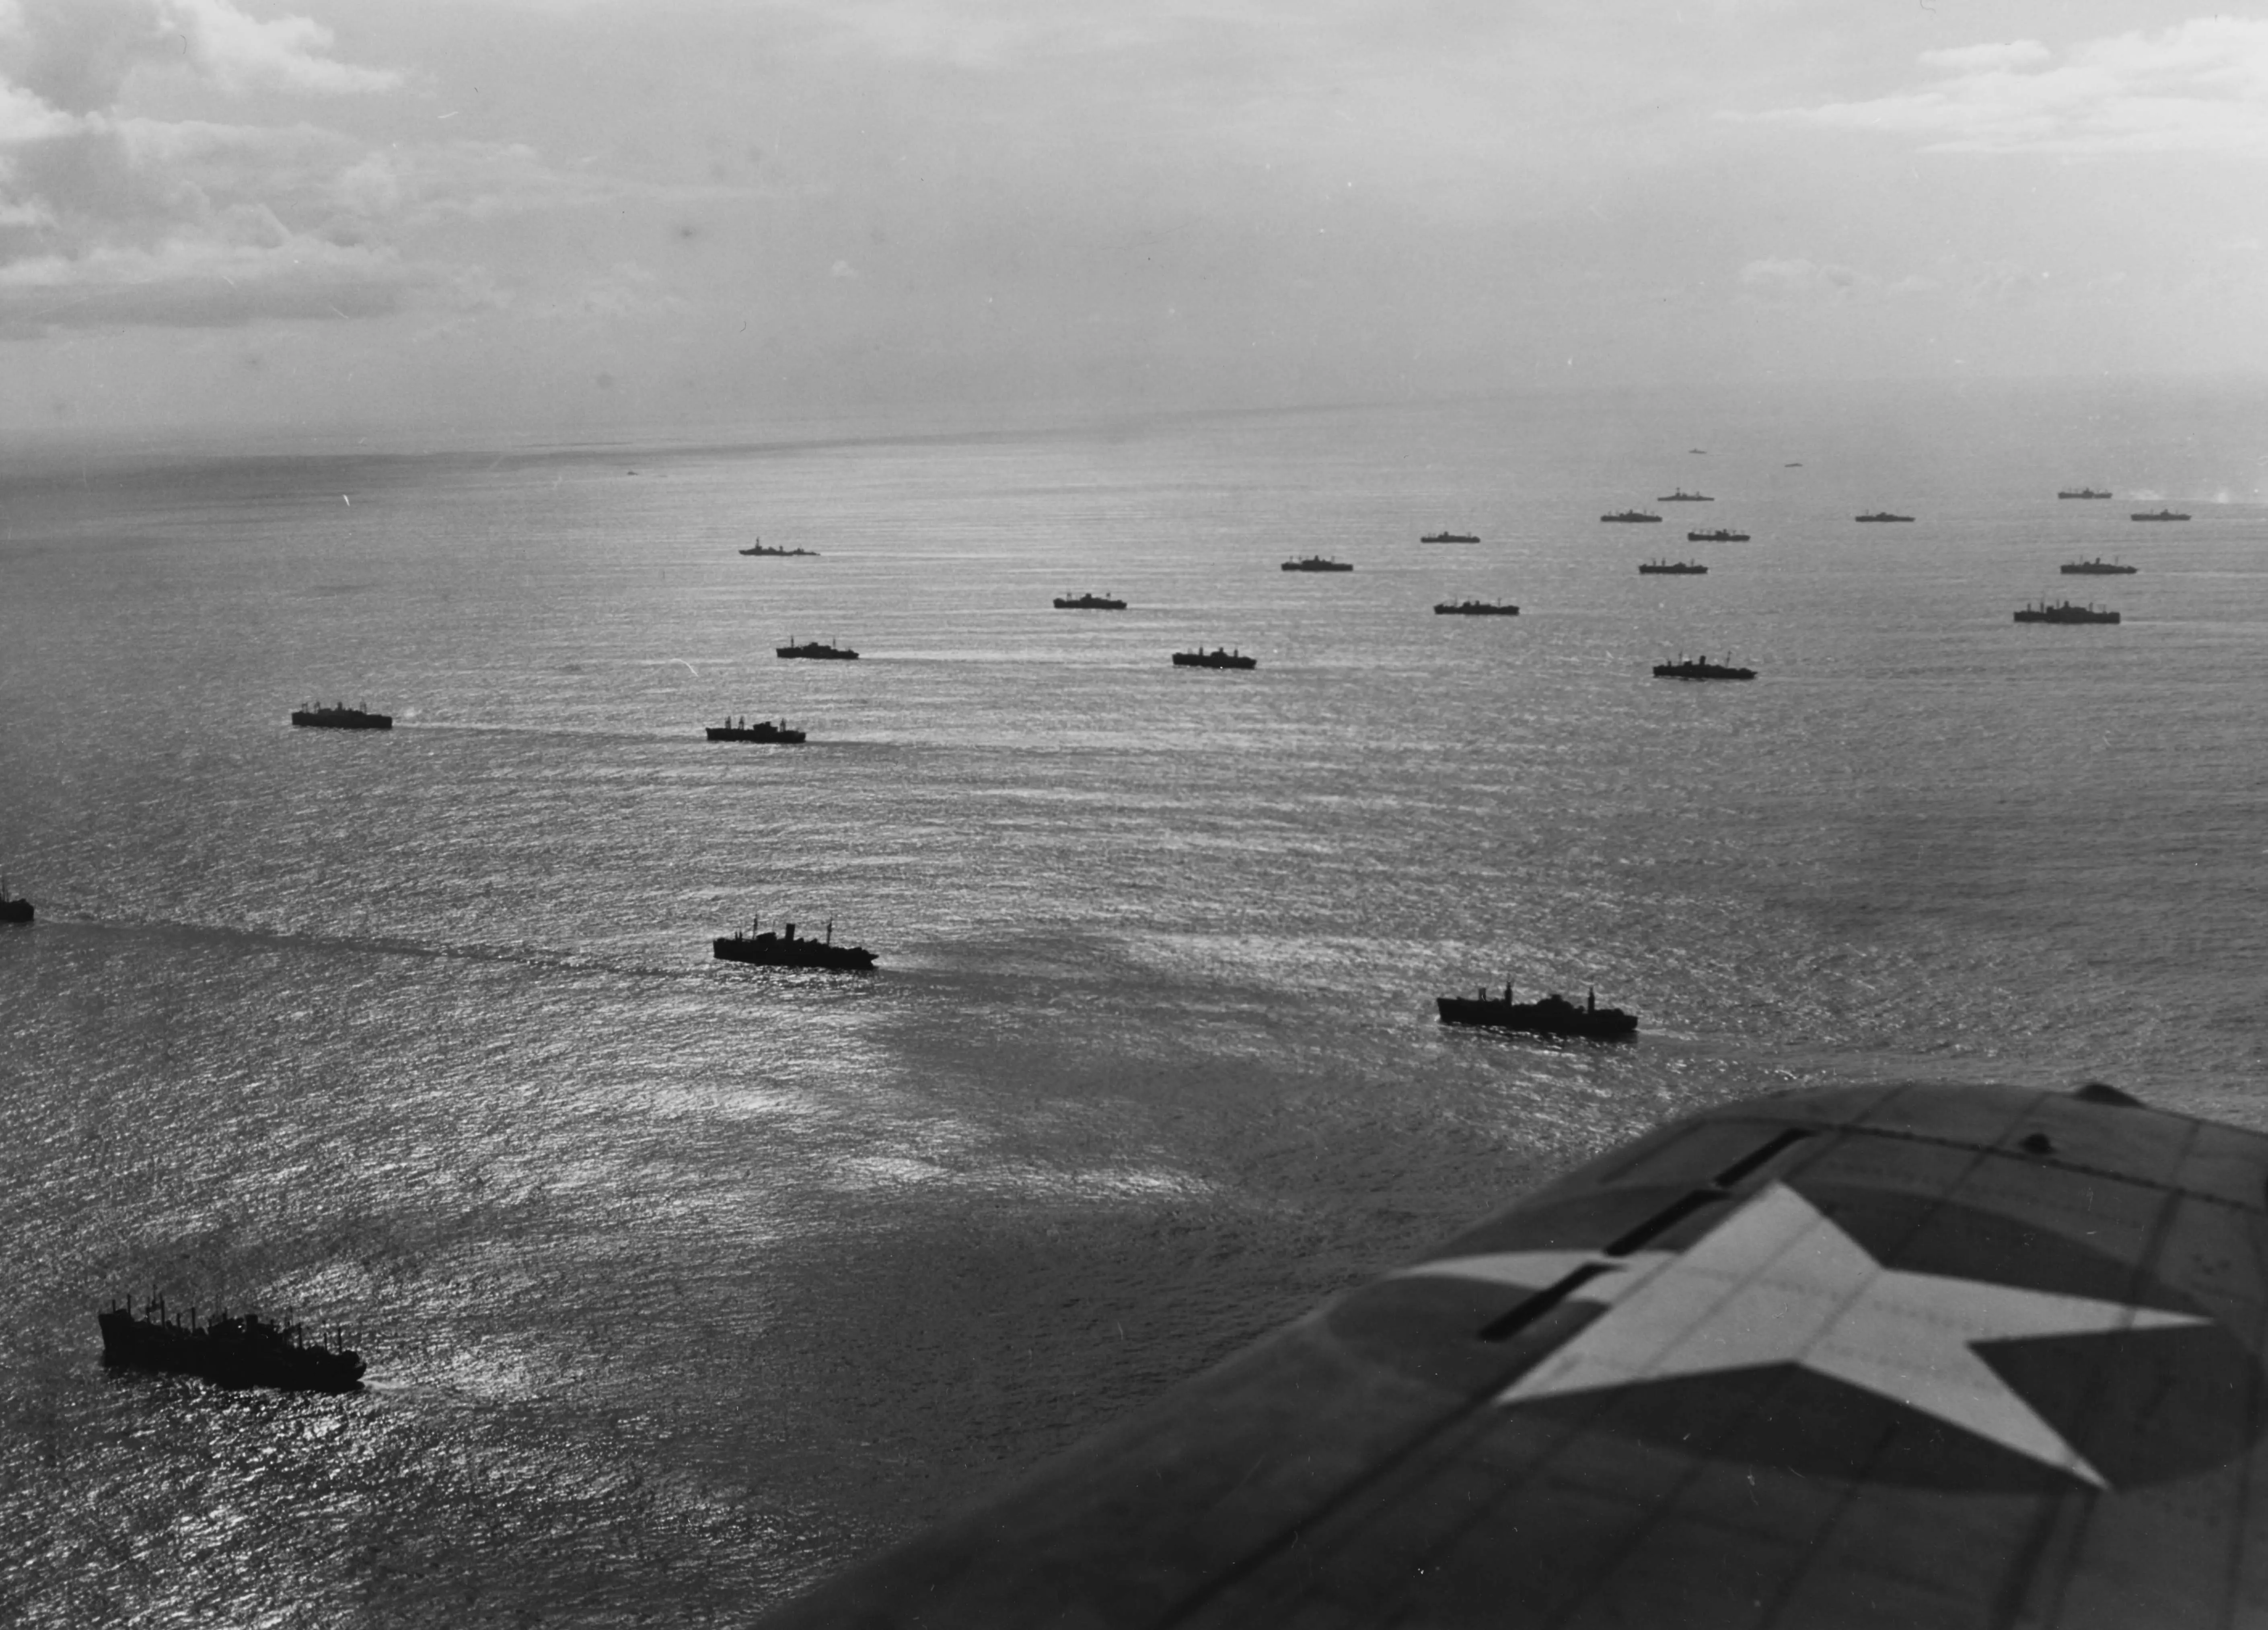 An aerial photograph of about two dozen ships steaming in open ocean and lined up in several columns. The wing of the plane is visible with the circle and star roundel of US war planes.